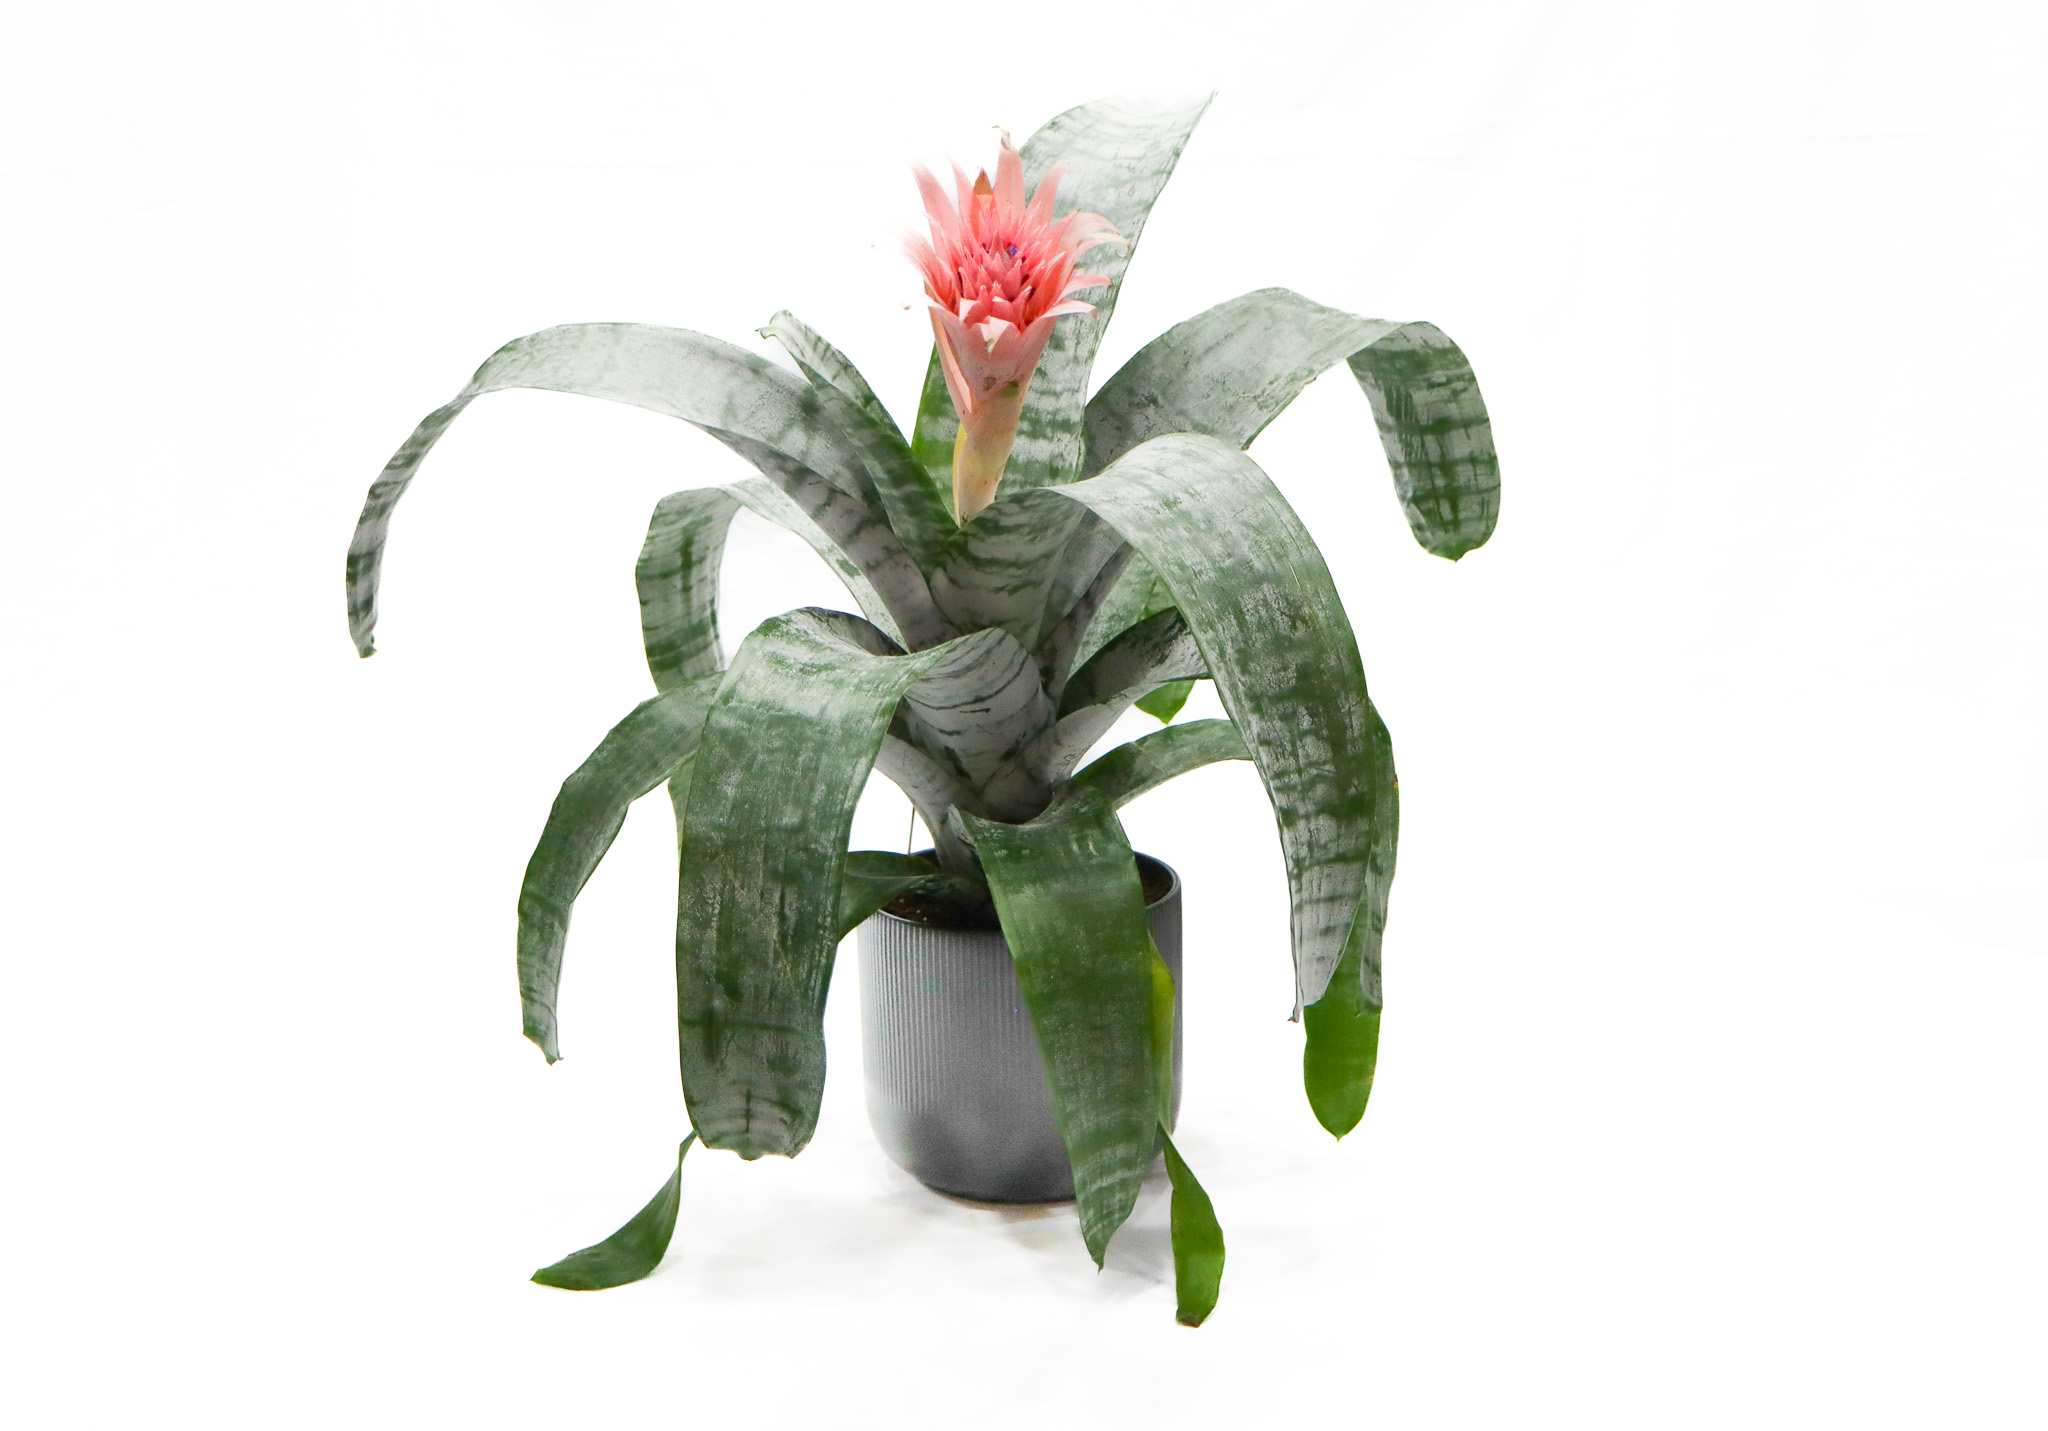 Aechmea - Aechmea fasciata is a species of flowering plant in the Bromeliaceae family. It is commonly called the silver vase or urn plant and is native to Brazil. This plant is probably the best known species in this genus, and it is often grown as a houseplant in temperate areas.